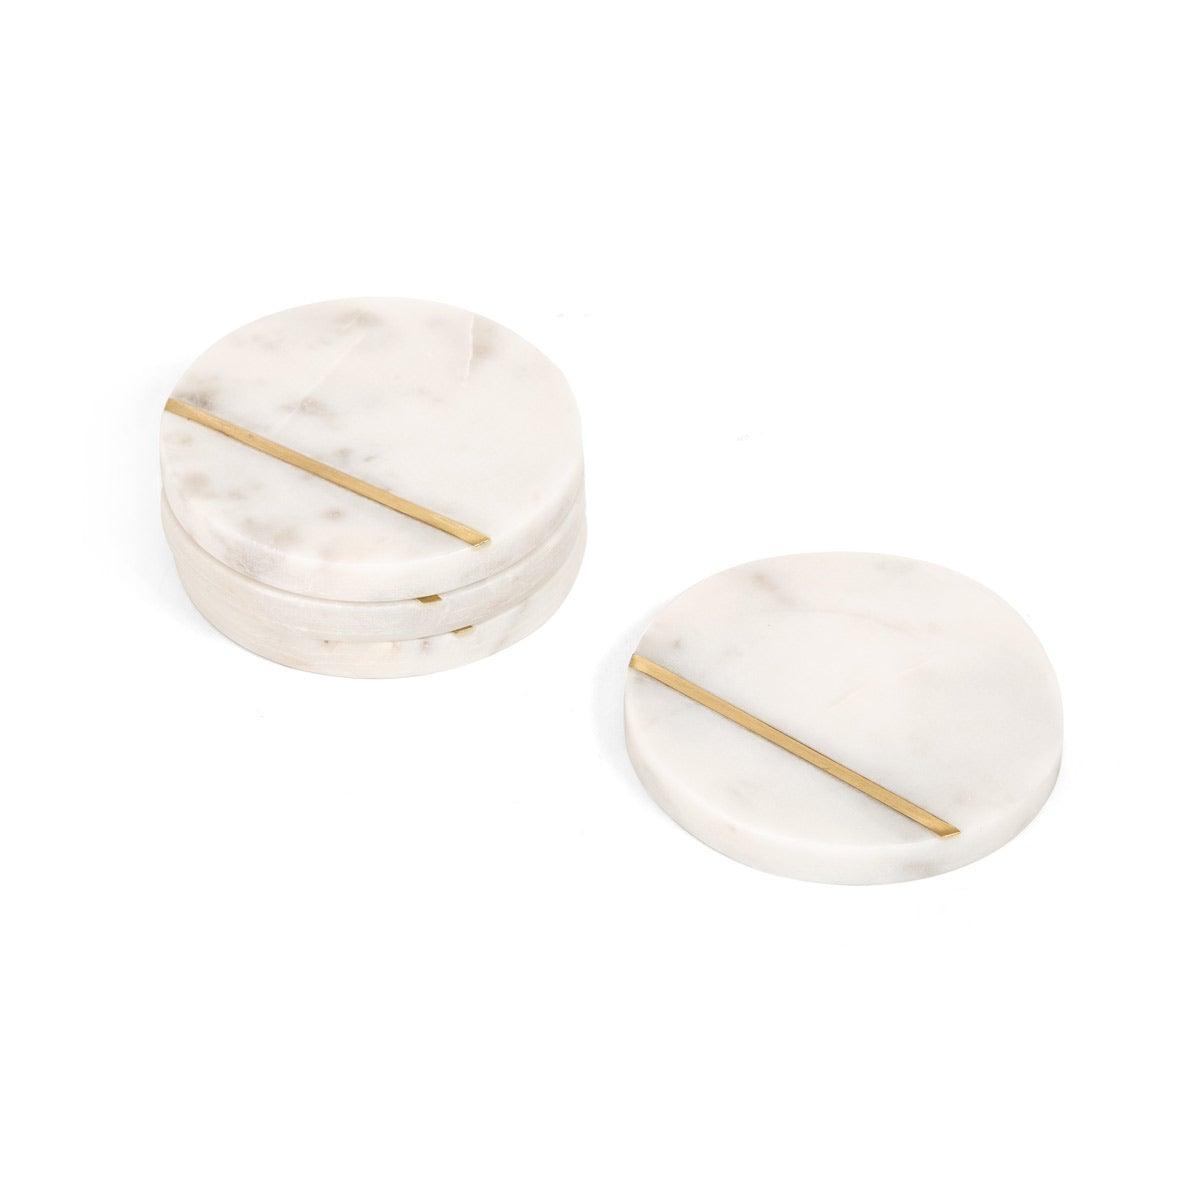 Audrey Round Coaster Set of 4 White Marble with brass single stripes - Home4u